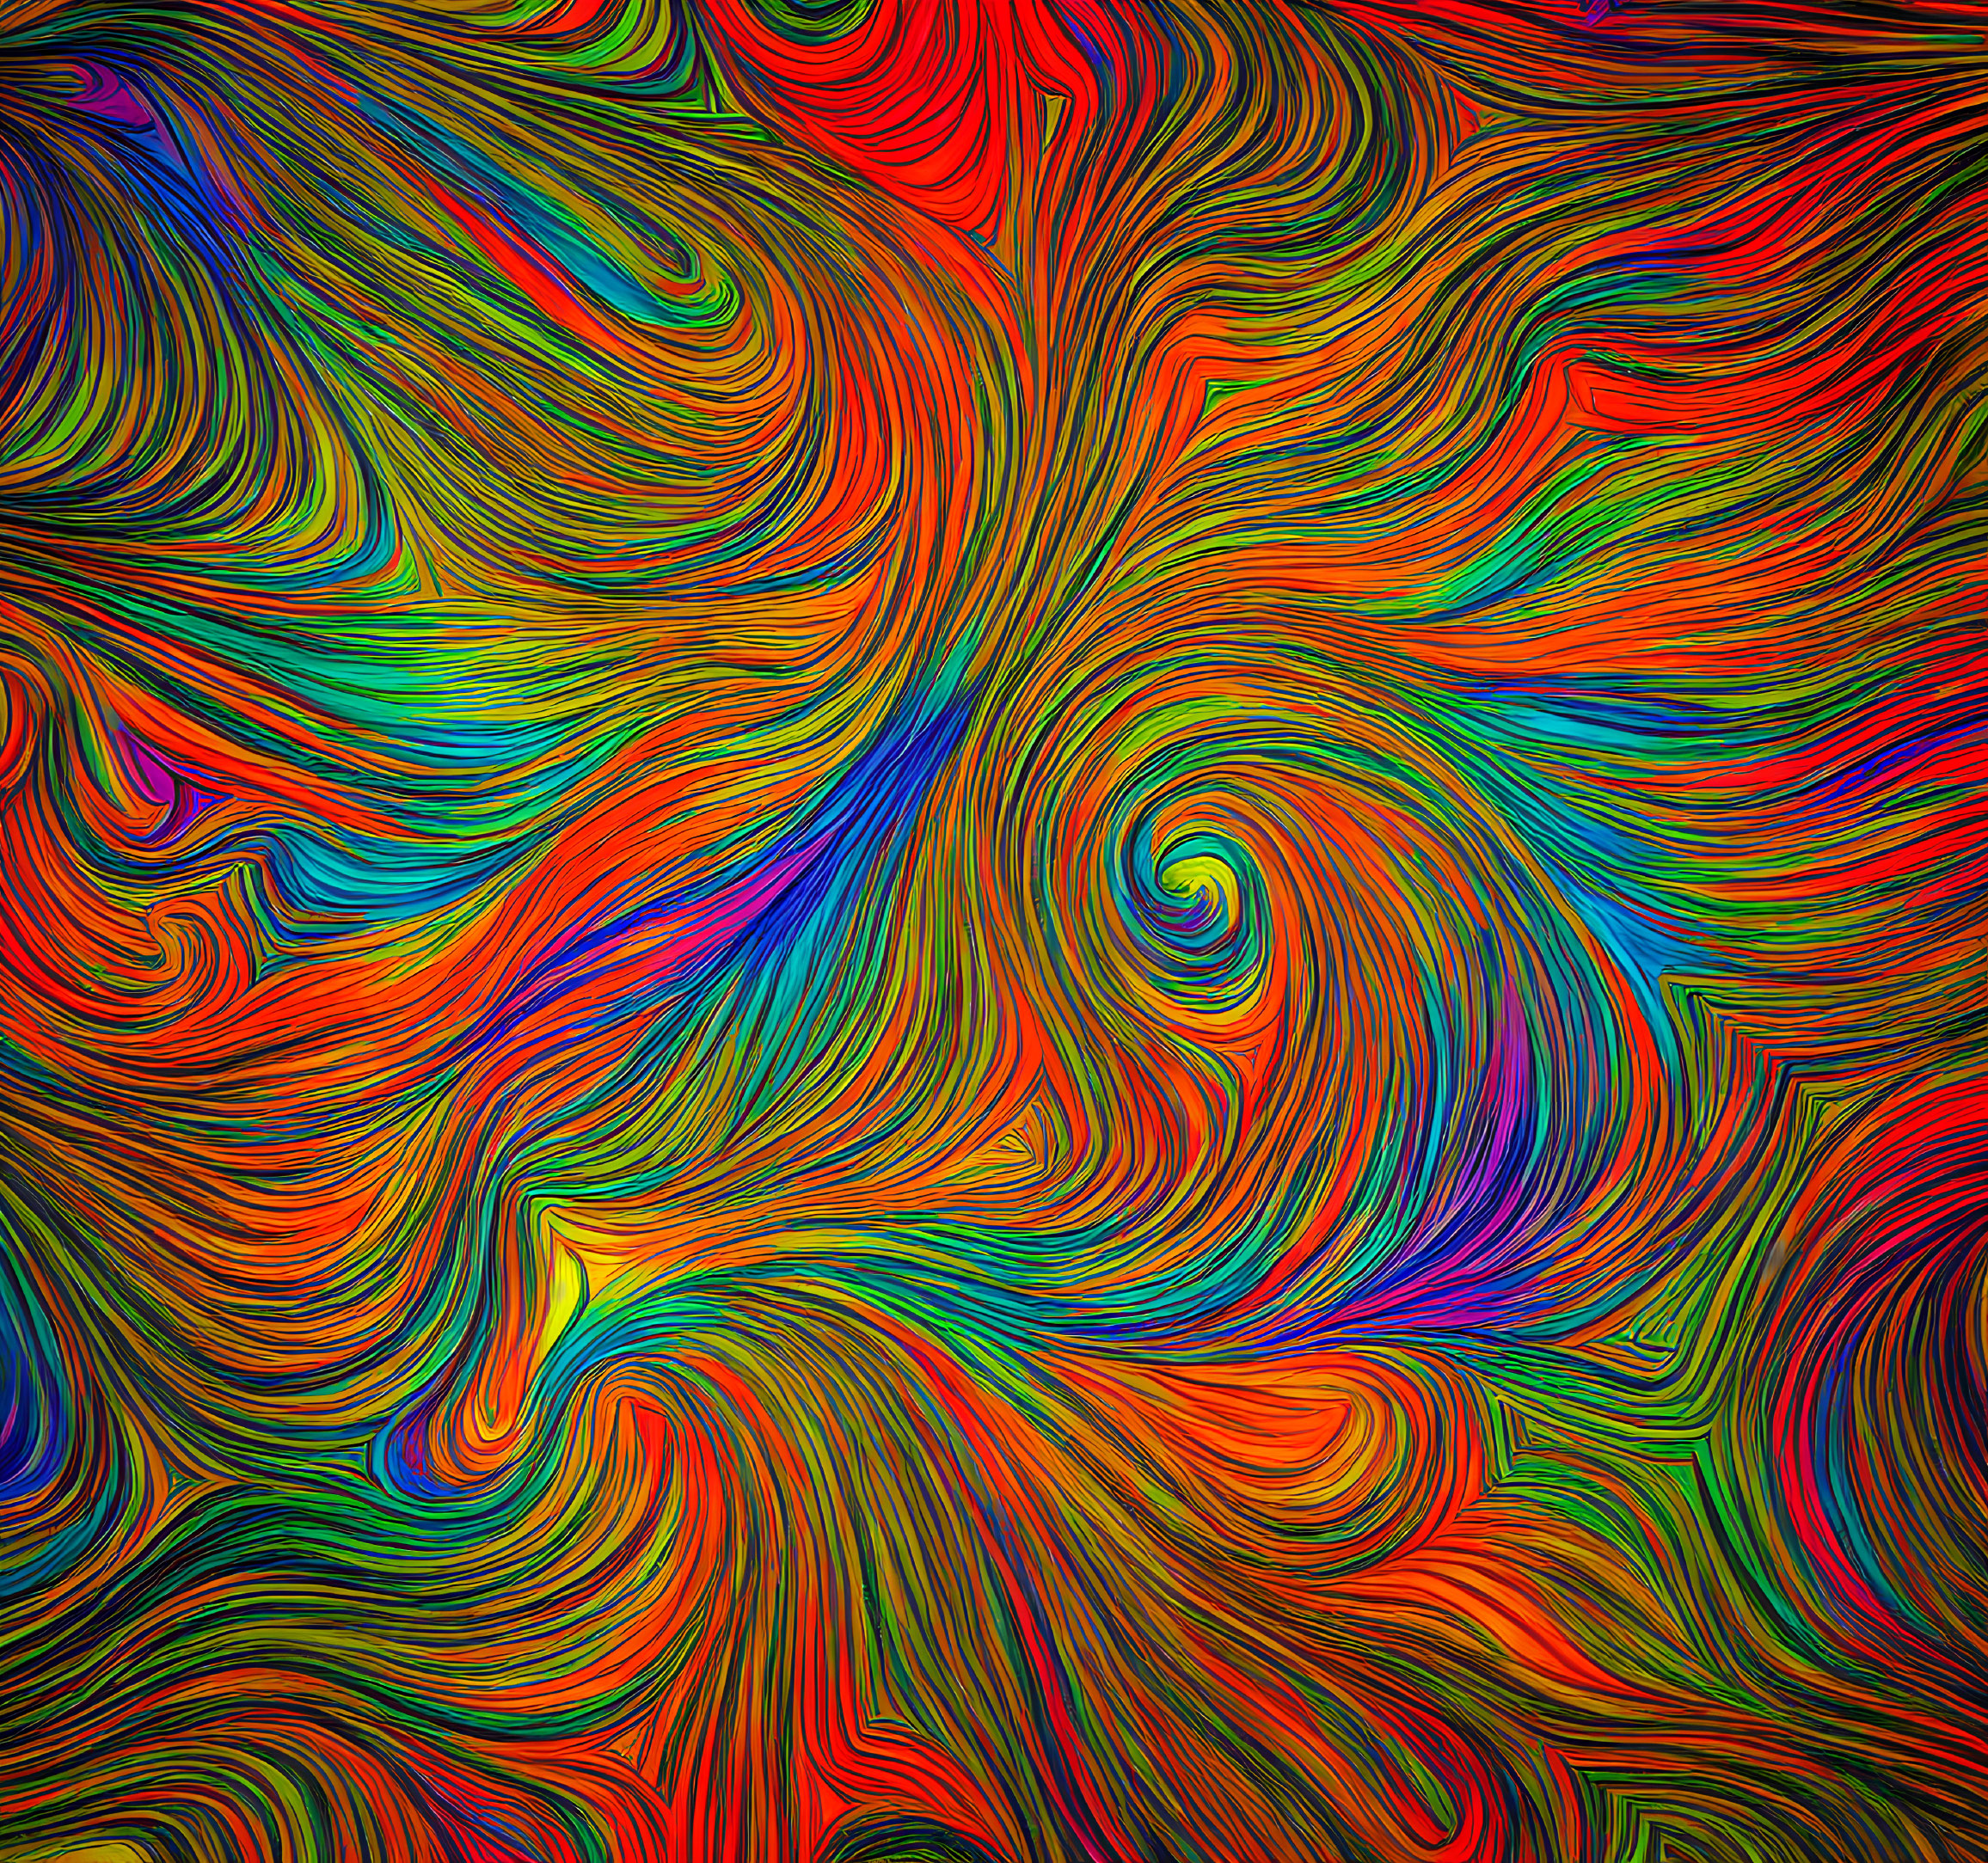 Colorful Abstract Digital Painting with Swirling Patterns